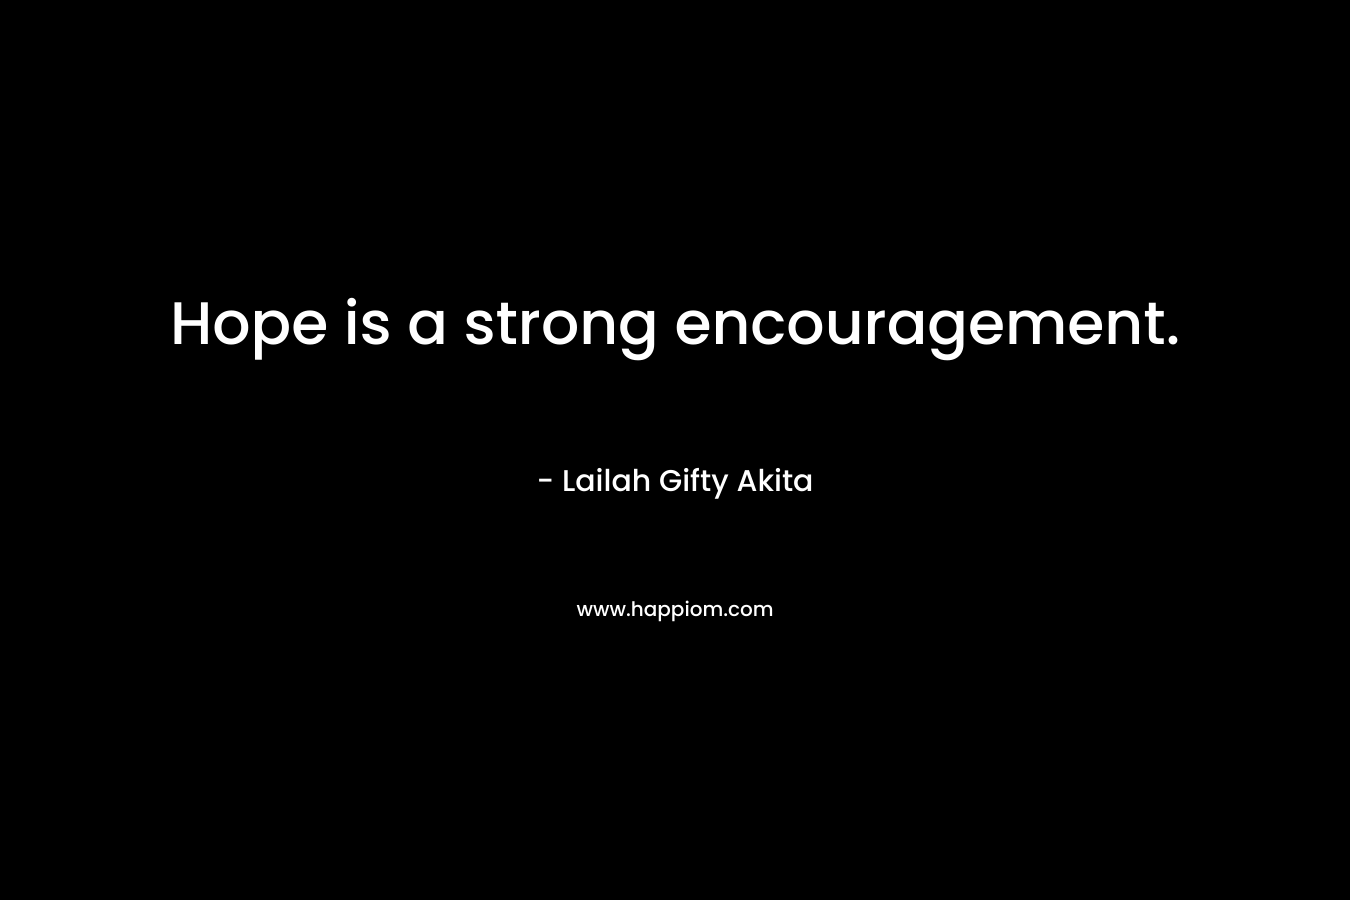 Hope is a strong encouragement.